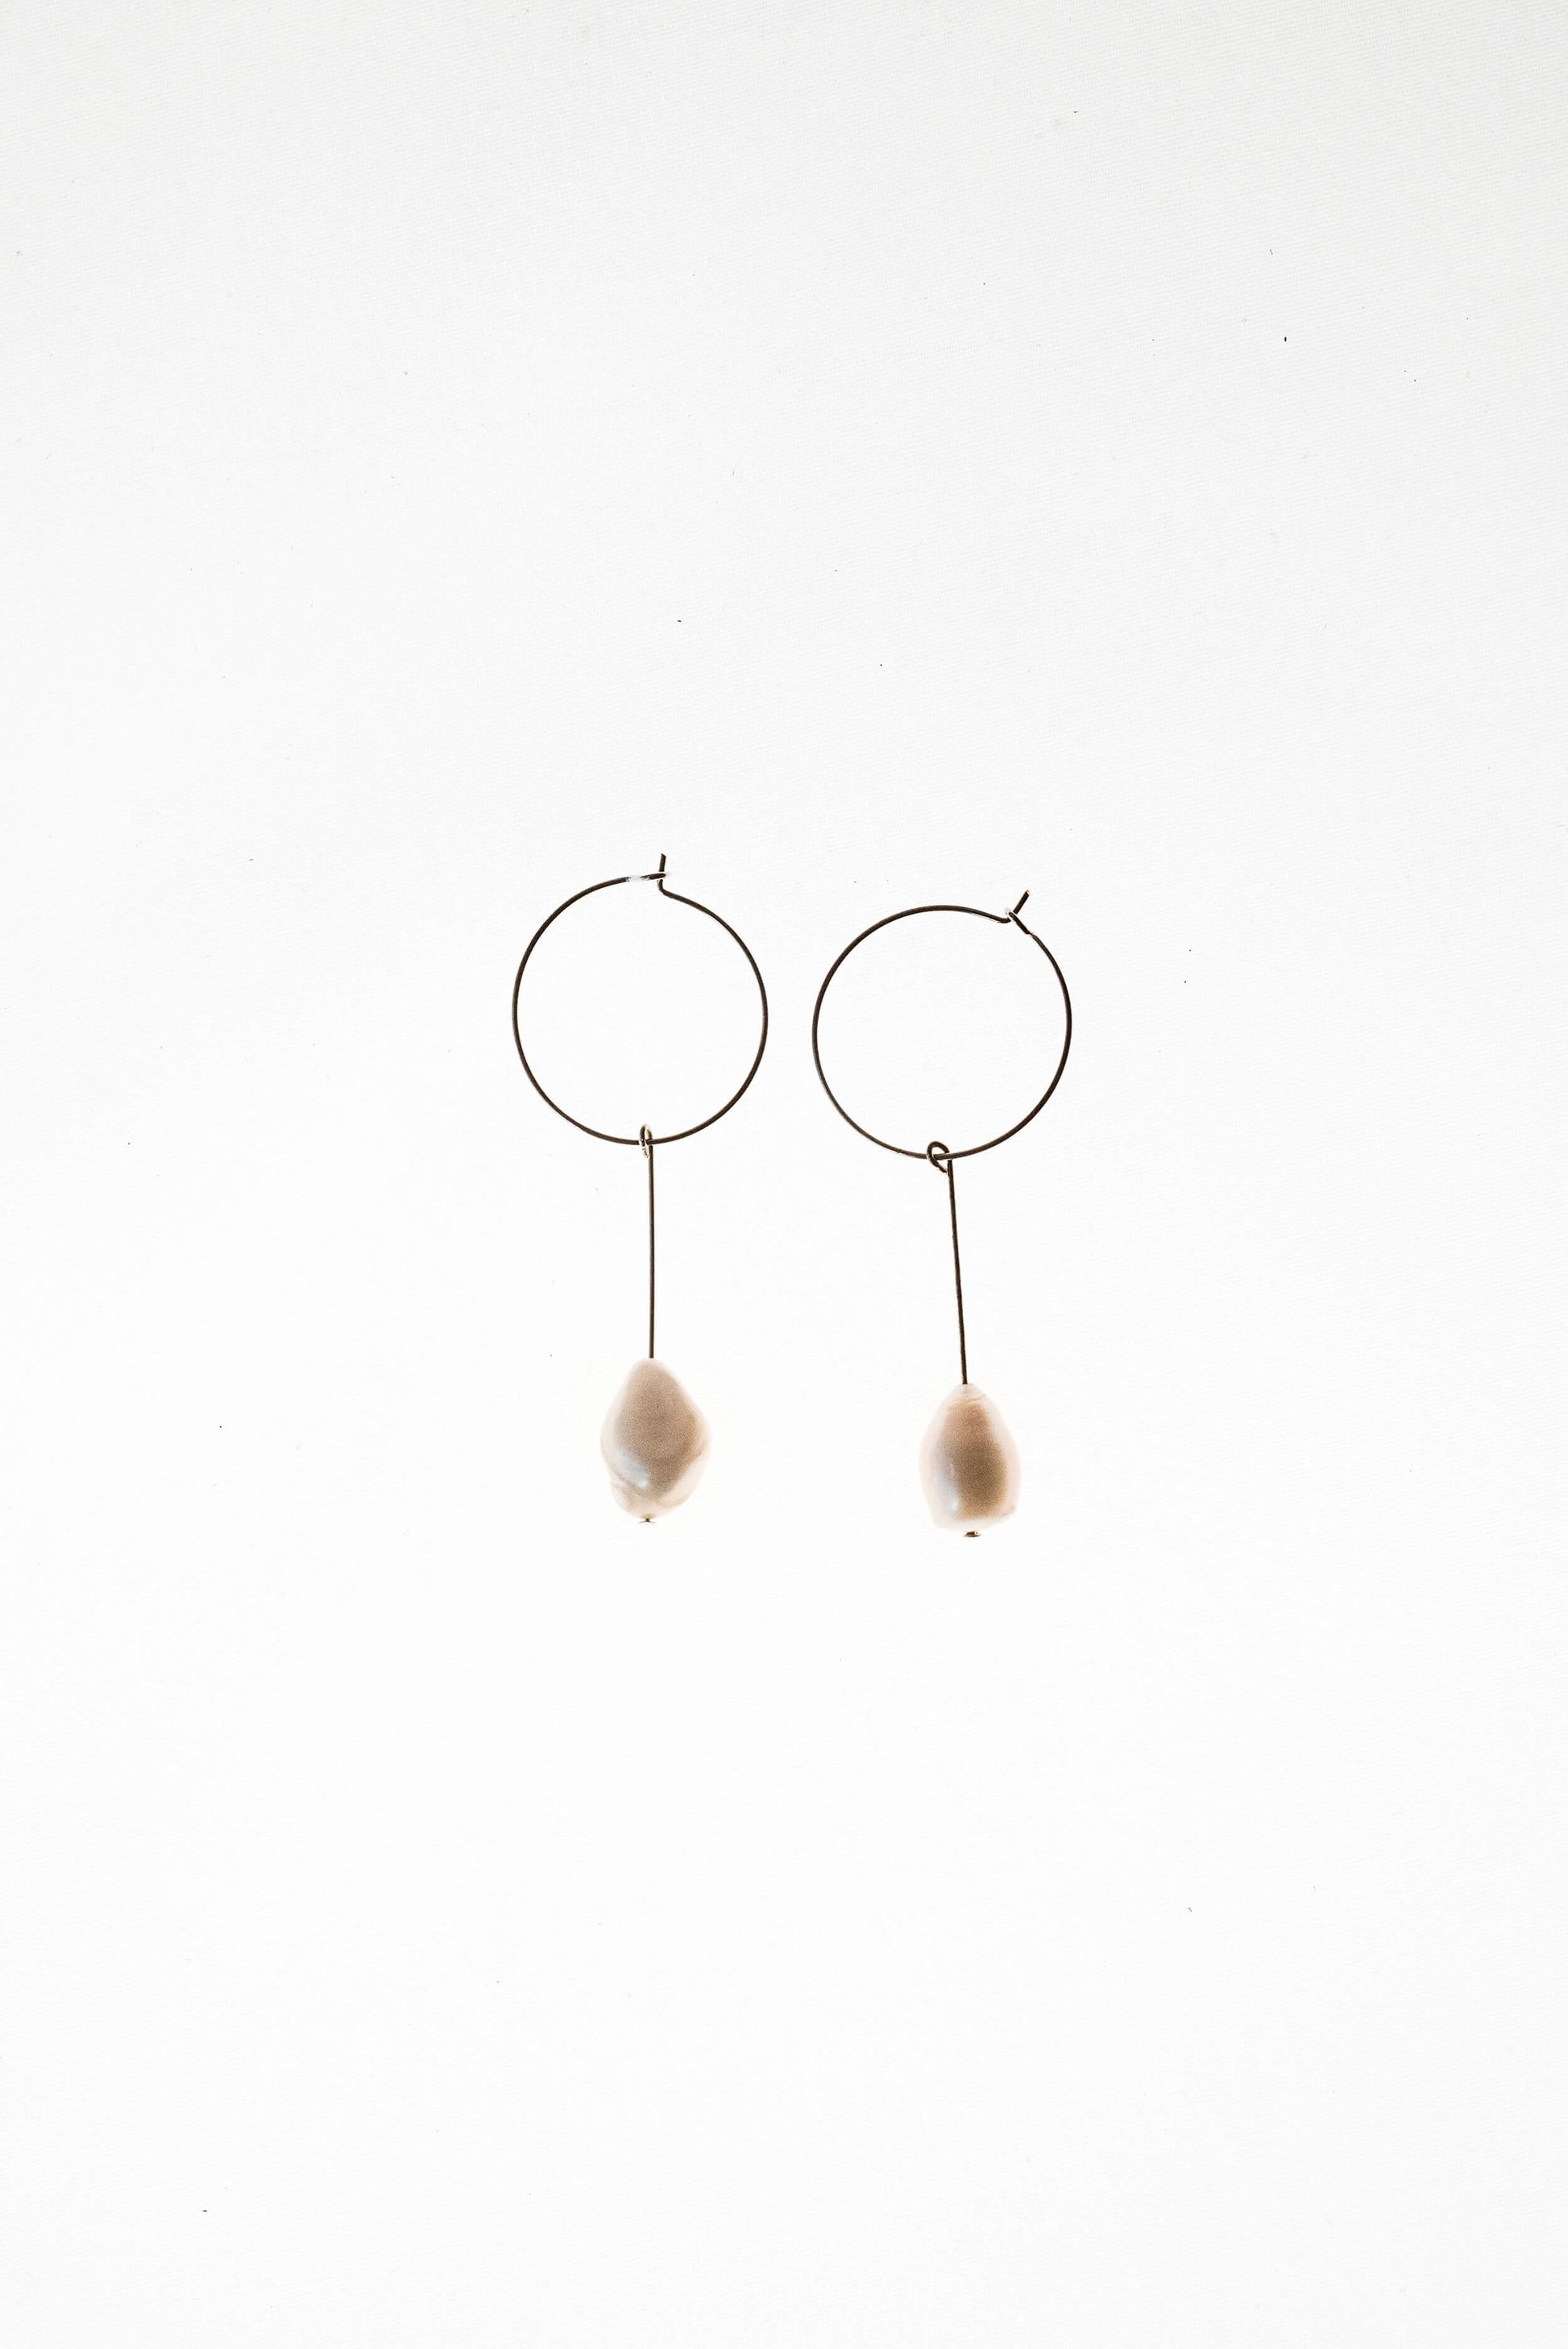 Earrings made of galvanized brass and freshwater pearl.